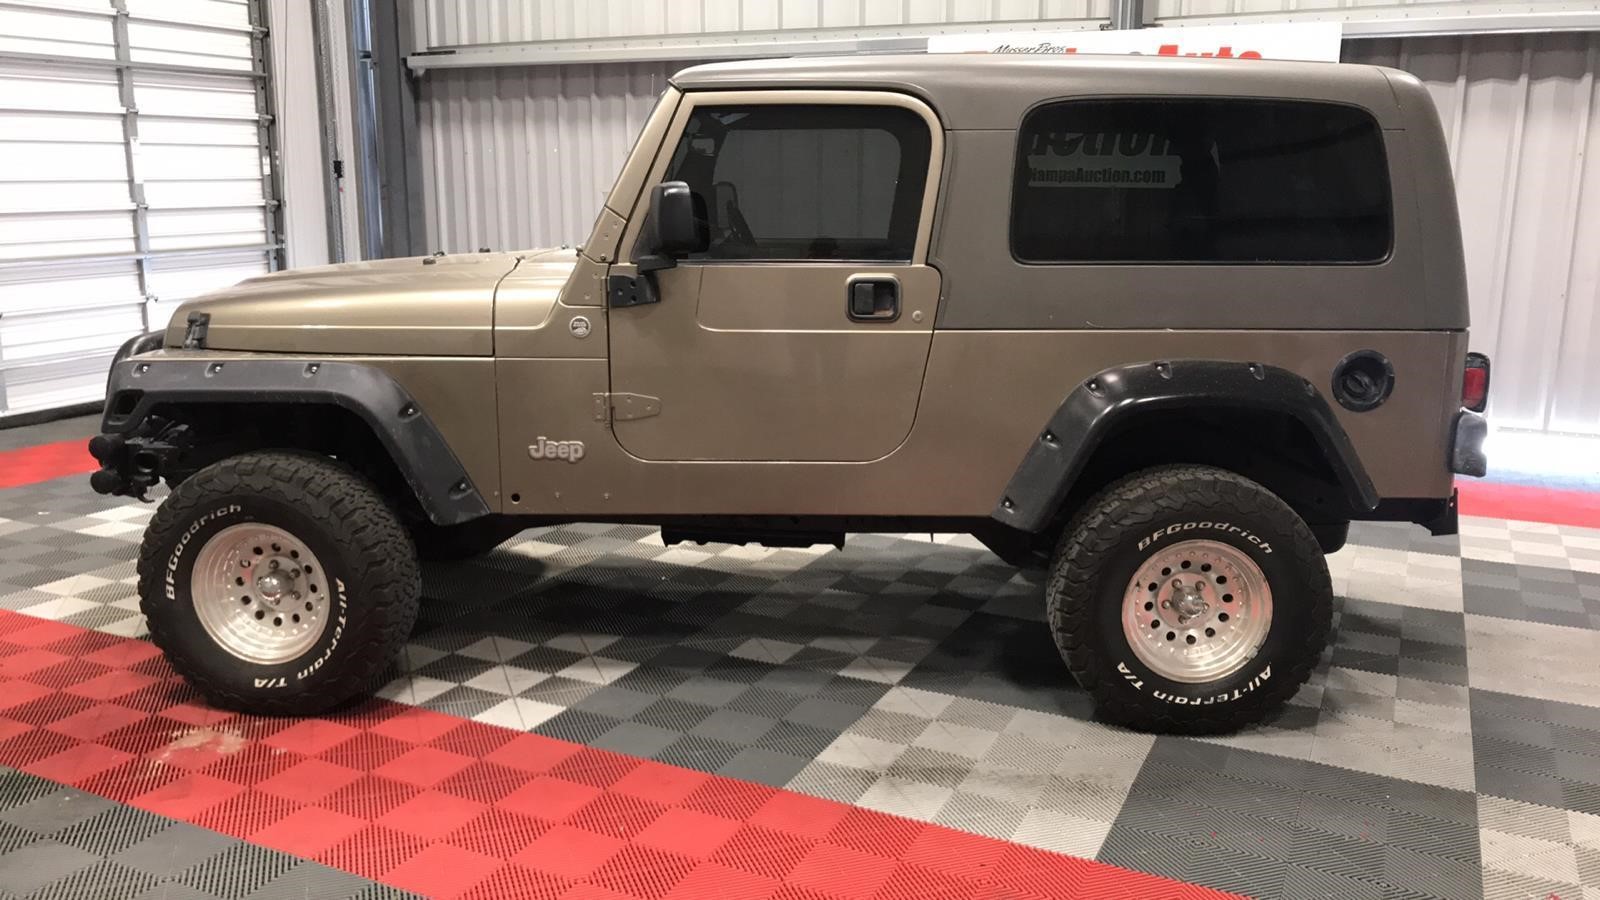 2005 Jeep Wrangler Unlimited | Musser Bros. Inc.